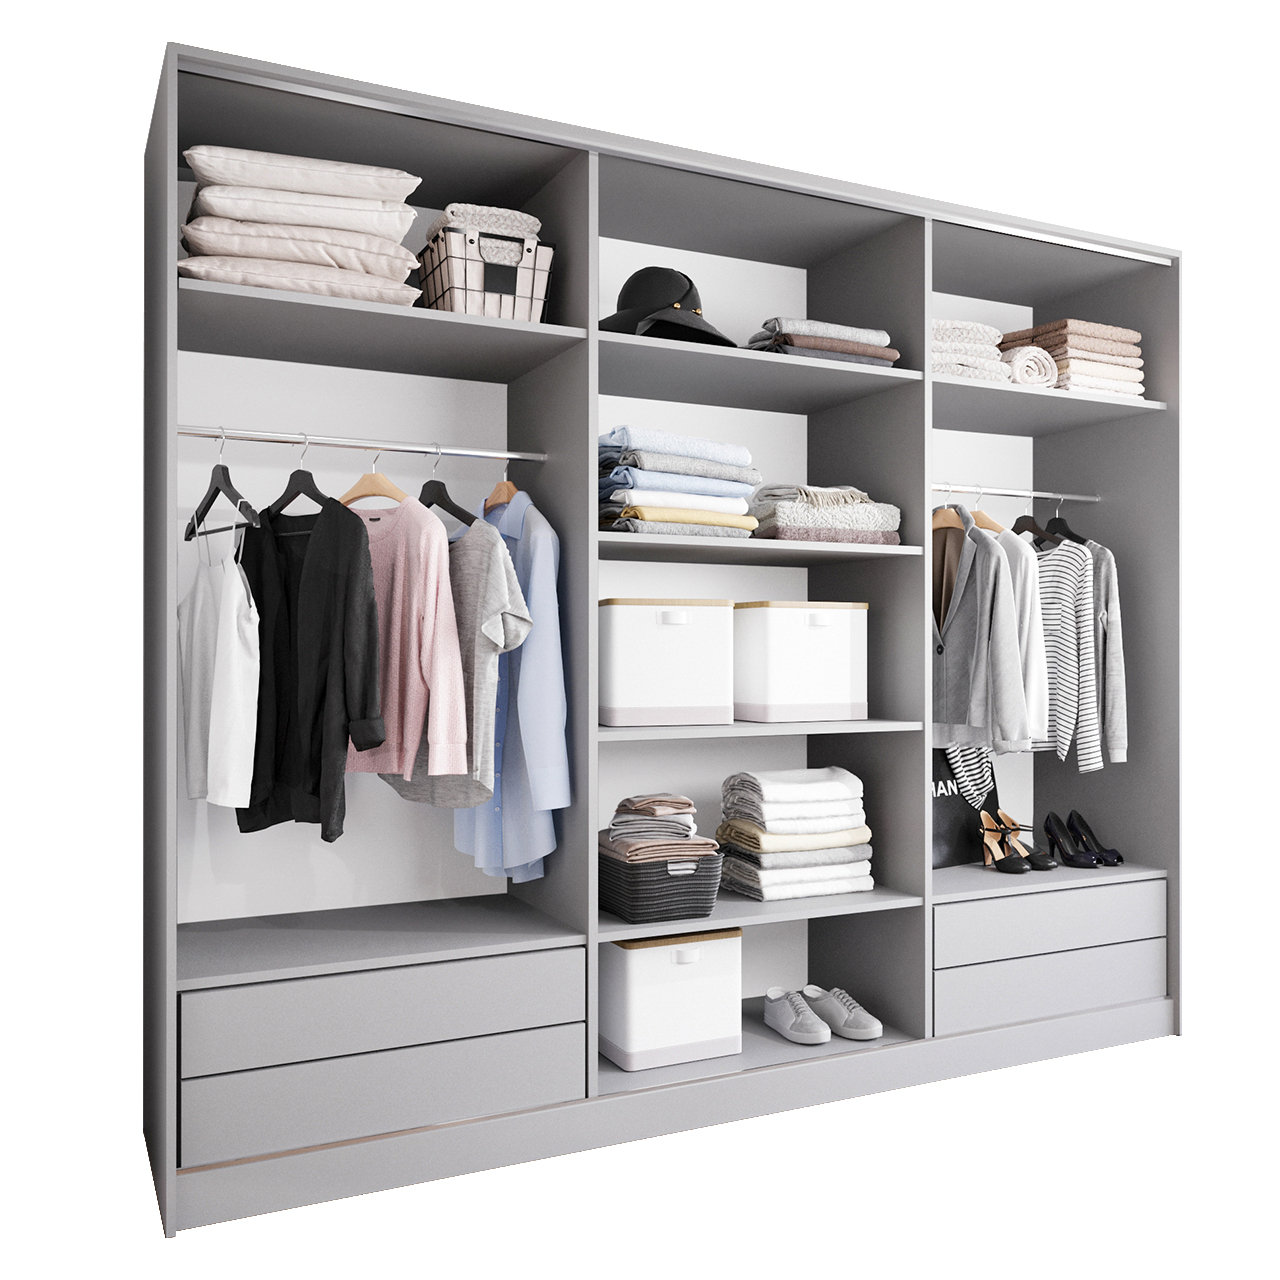 Sliding Wardrobe with Drawers BRITTO D 250 grey